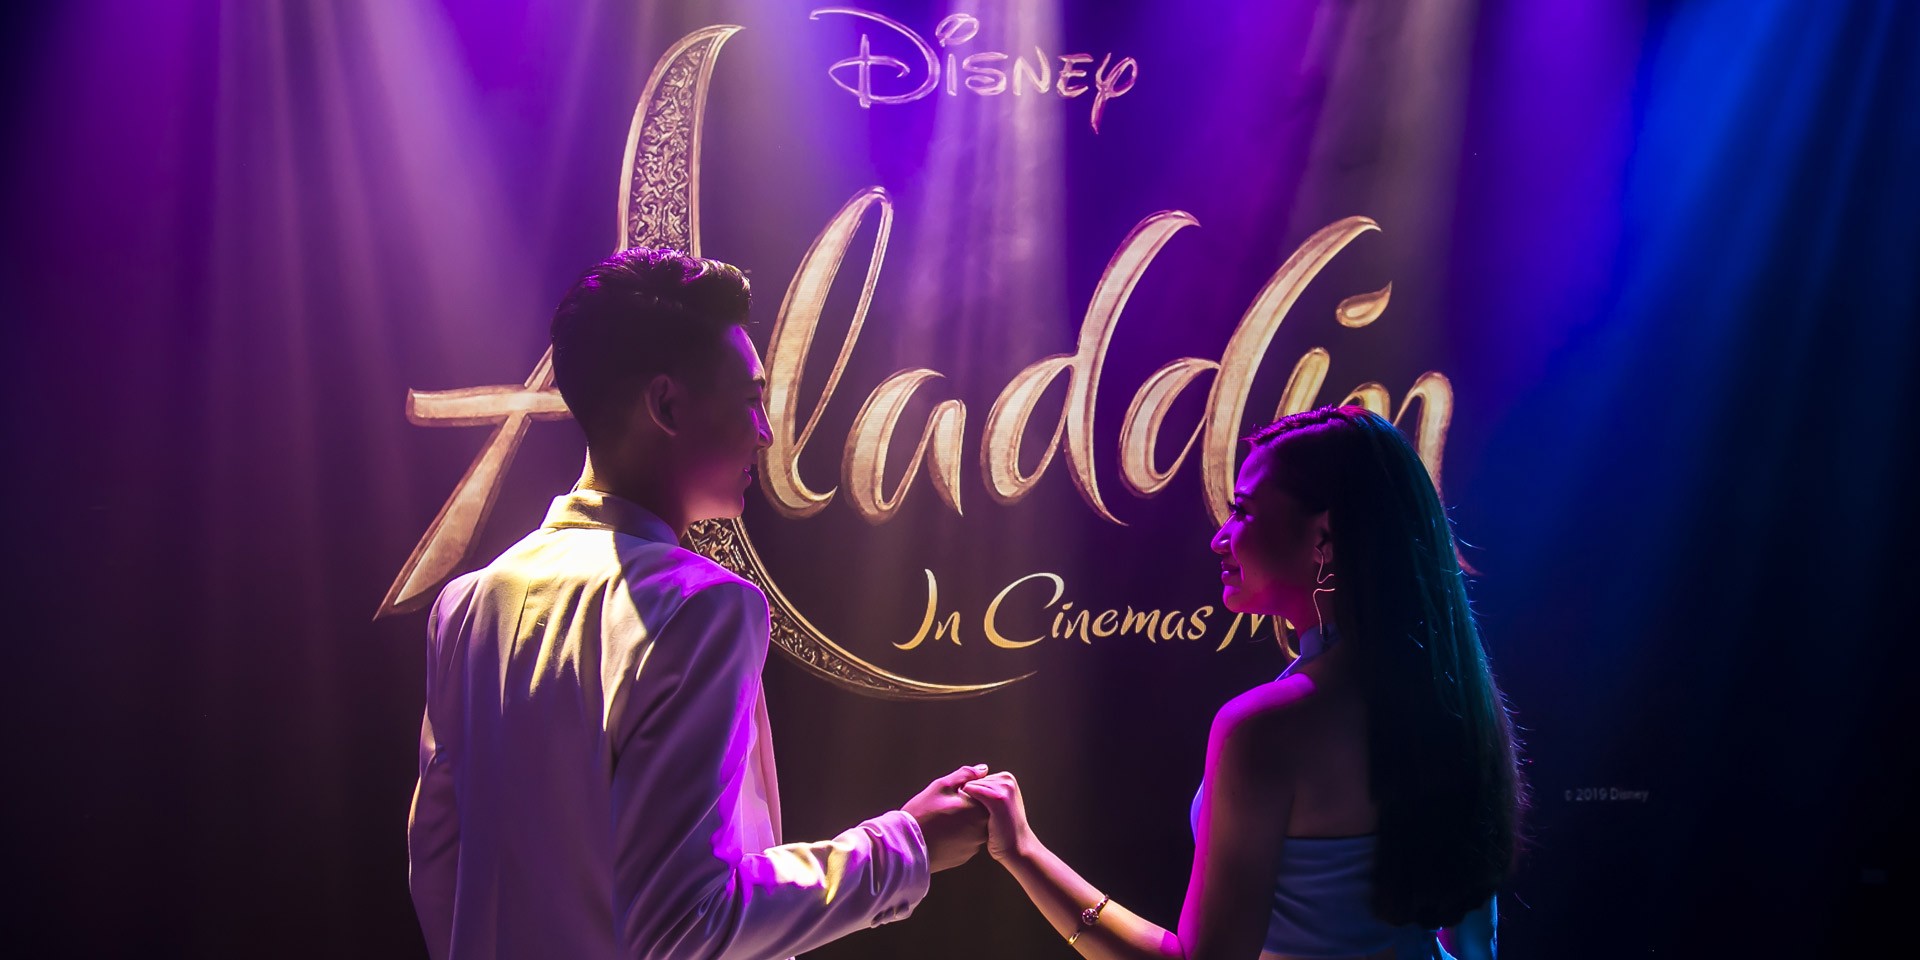 Darren Espanto and Morissette share their take of 'A Whole New World' – listen